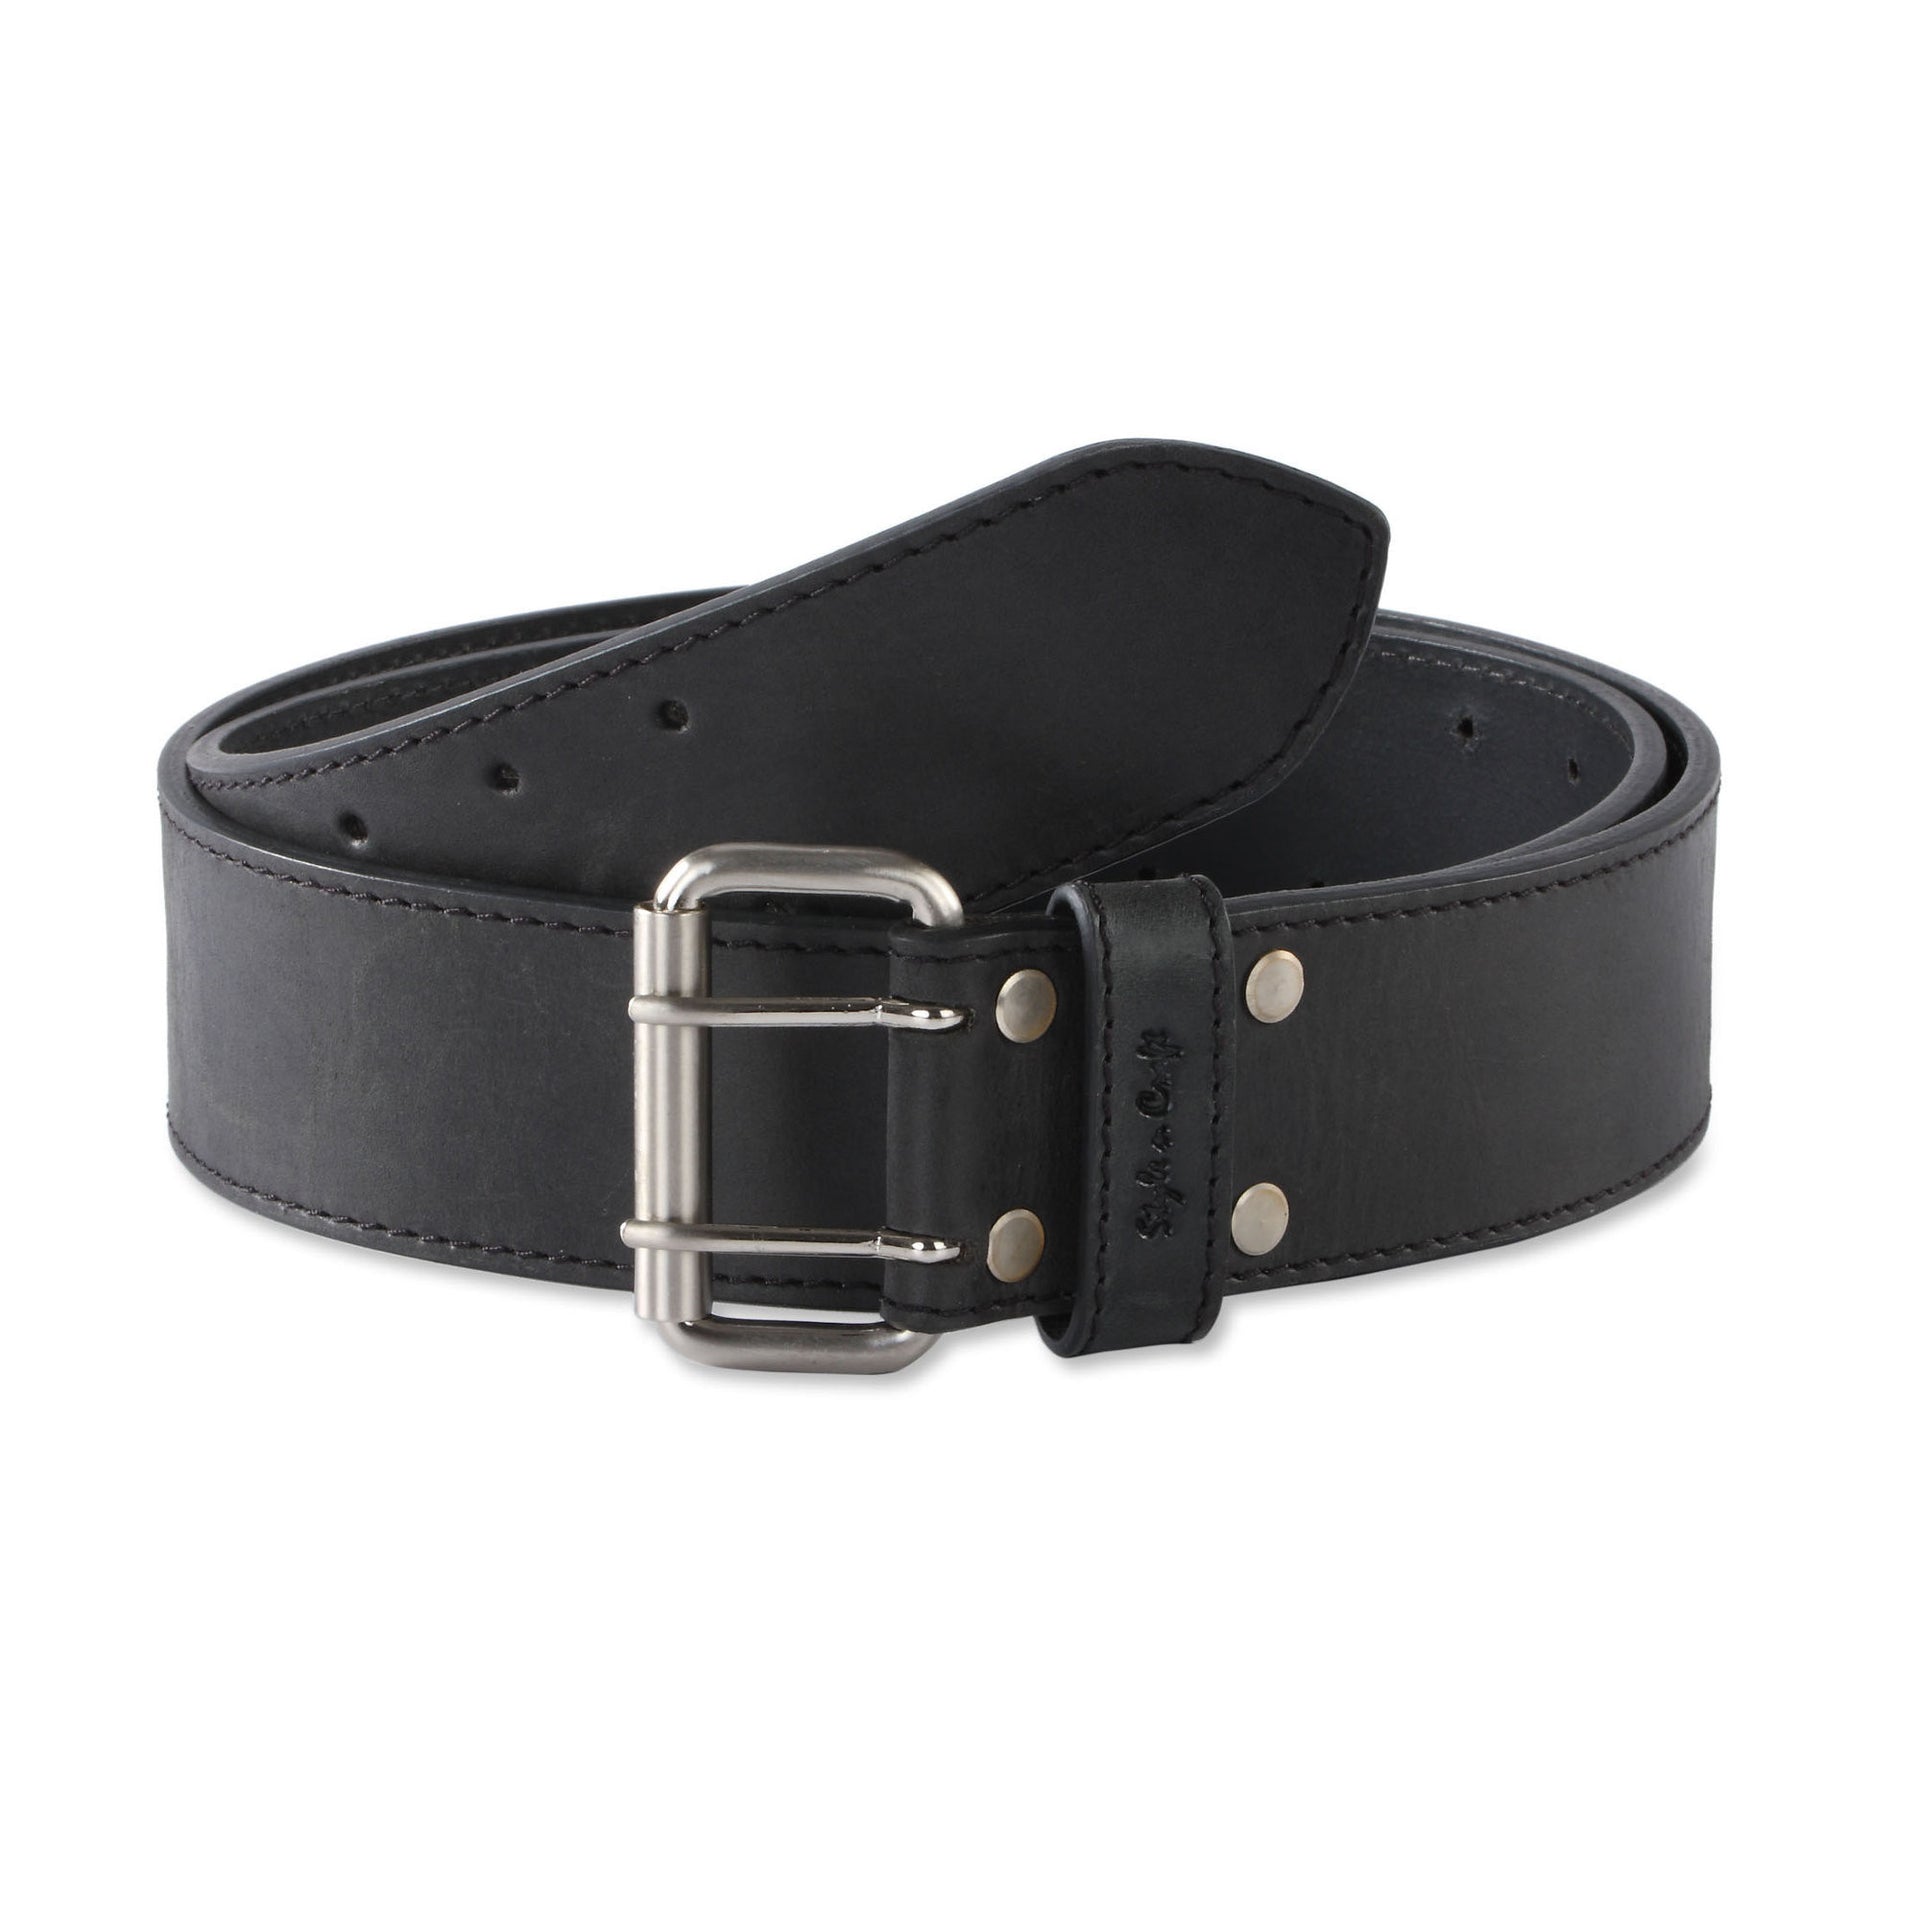 Wide Black Leather Belt With Brass Abstract Buckle Size 34 / Black Leather  2 1/2 Inch Wide Statement Belt 